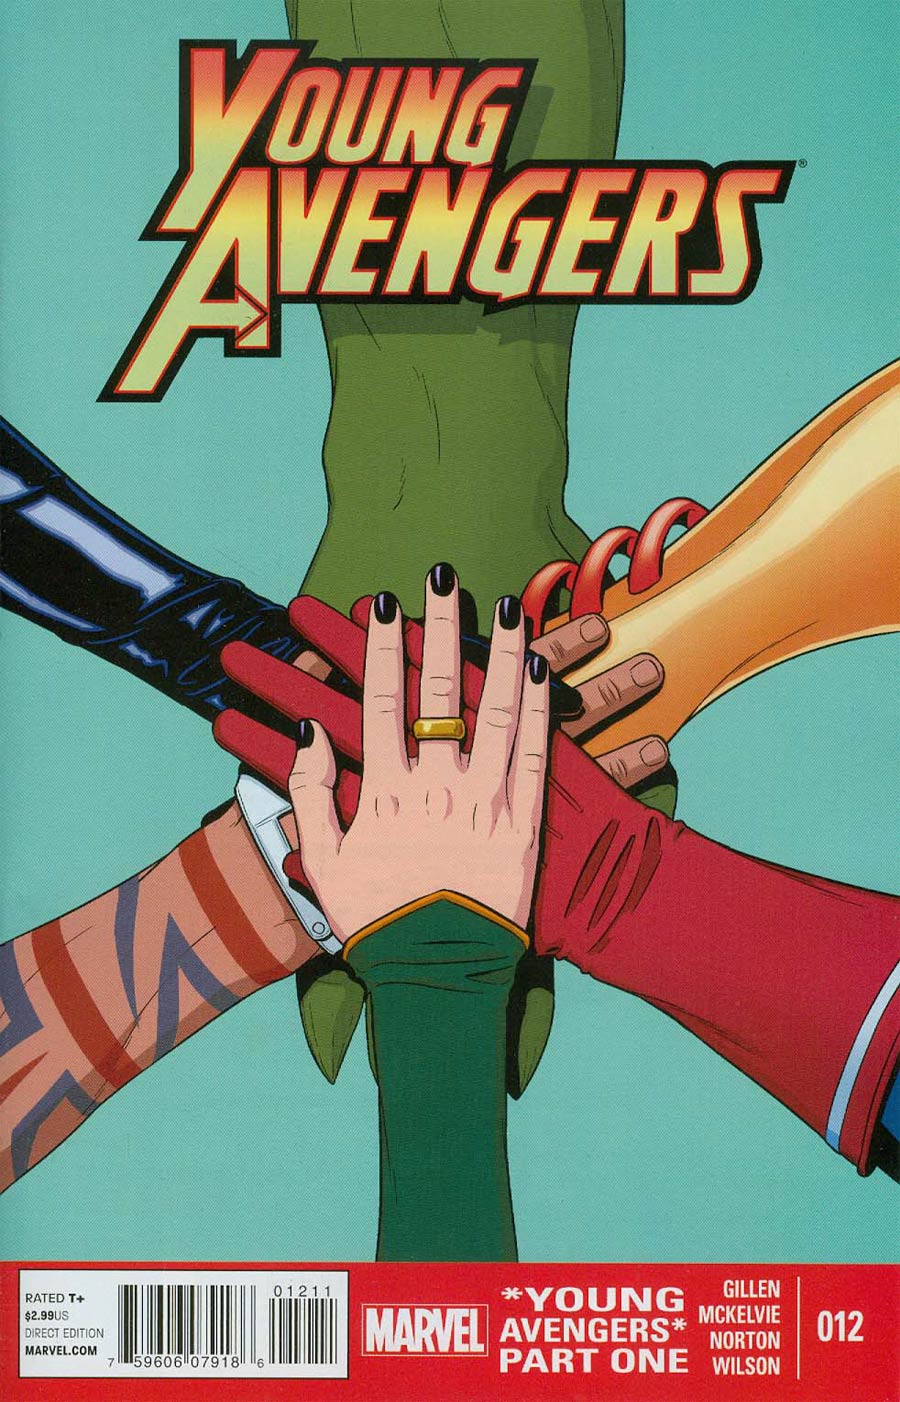 Young Avengers Vol 2 #12